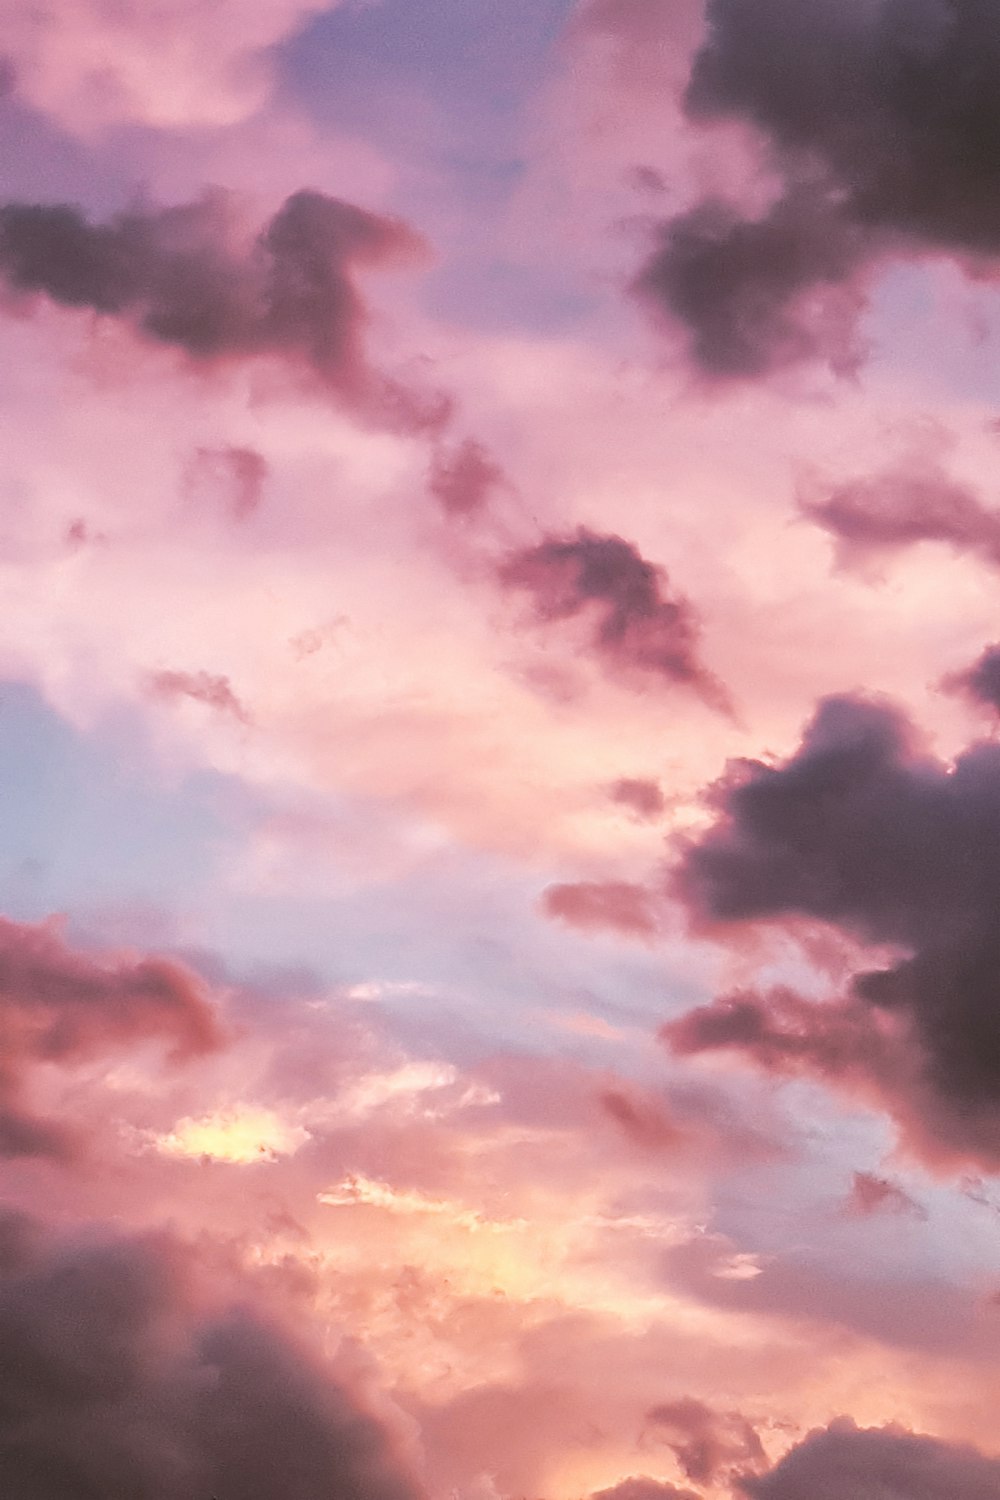 550+ Cloud Aesthetic Pictures  Download Free Images on Unsplash